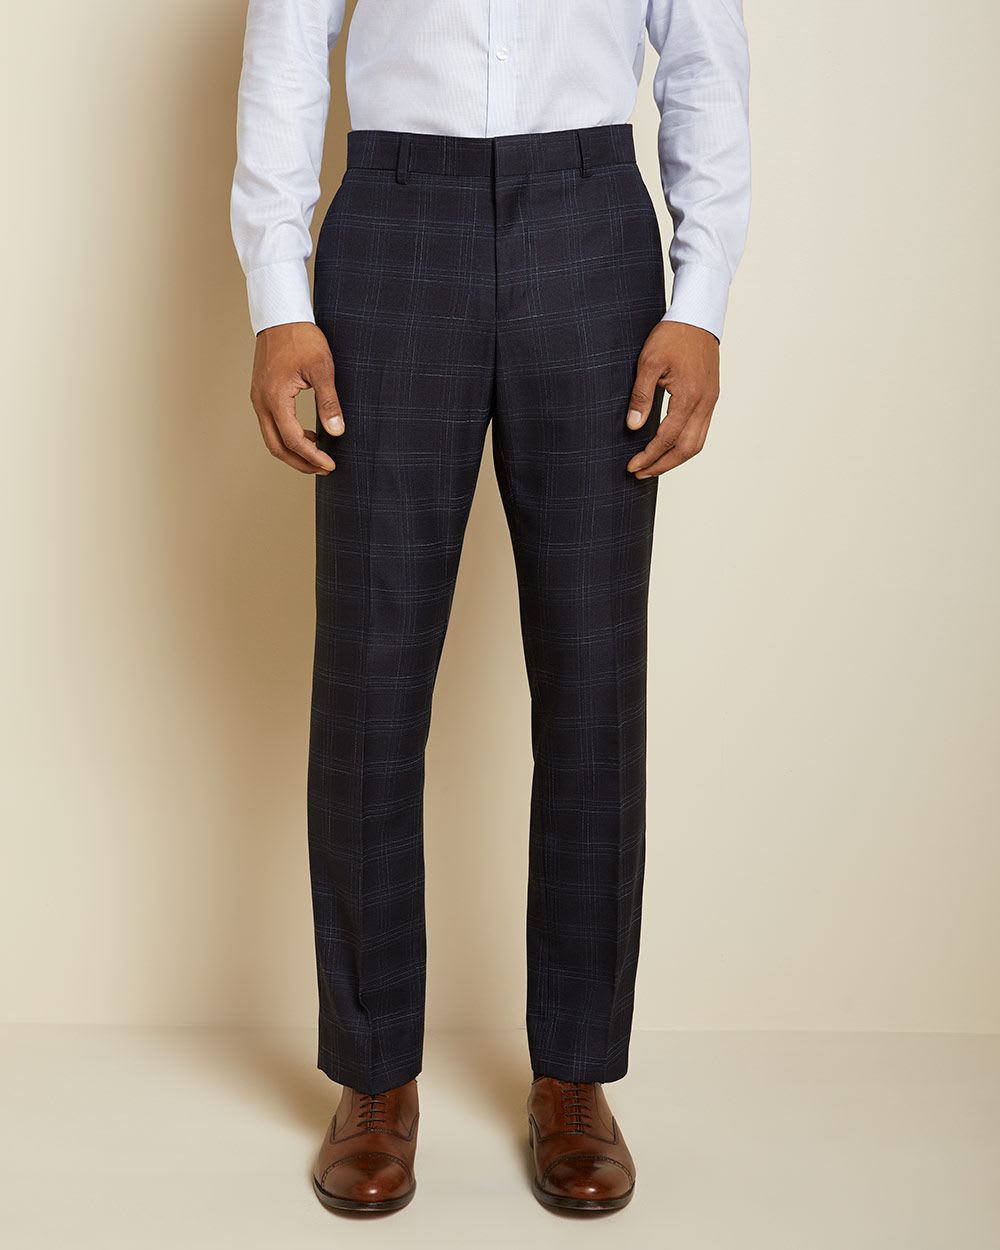 Tailored Fit checkered navy blue suit pant | RW&CO.